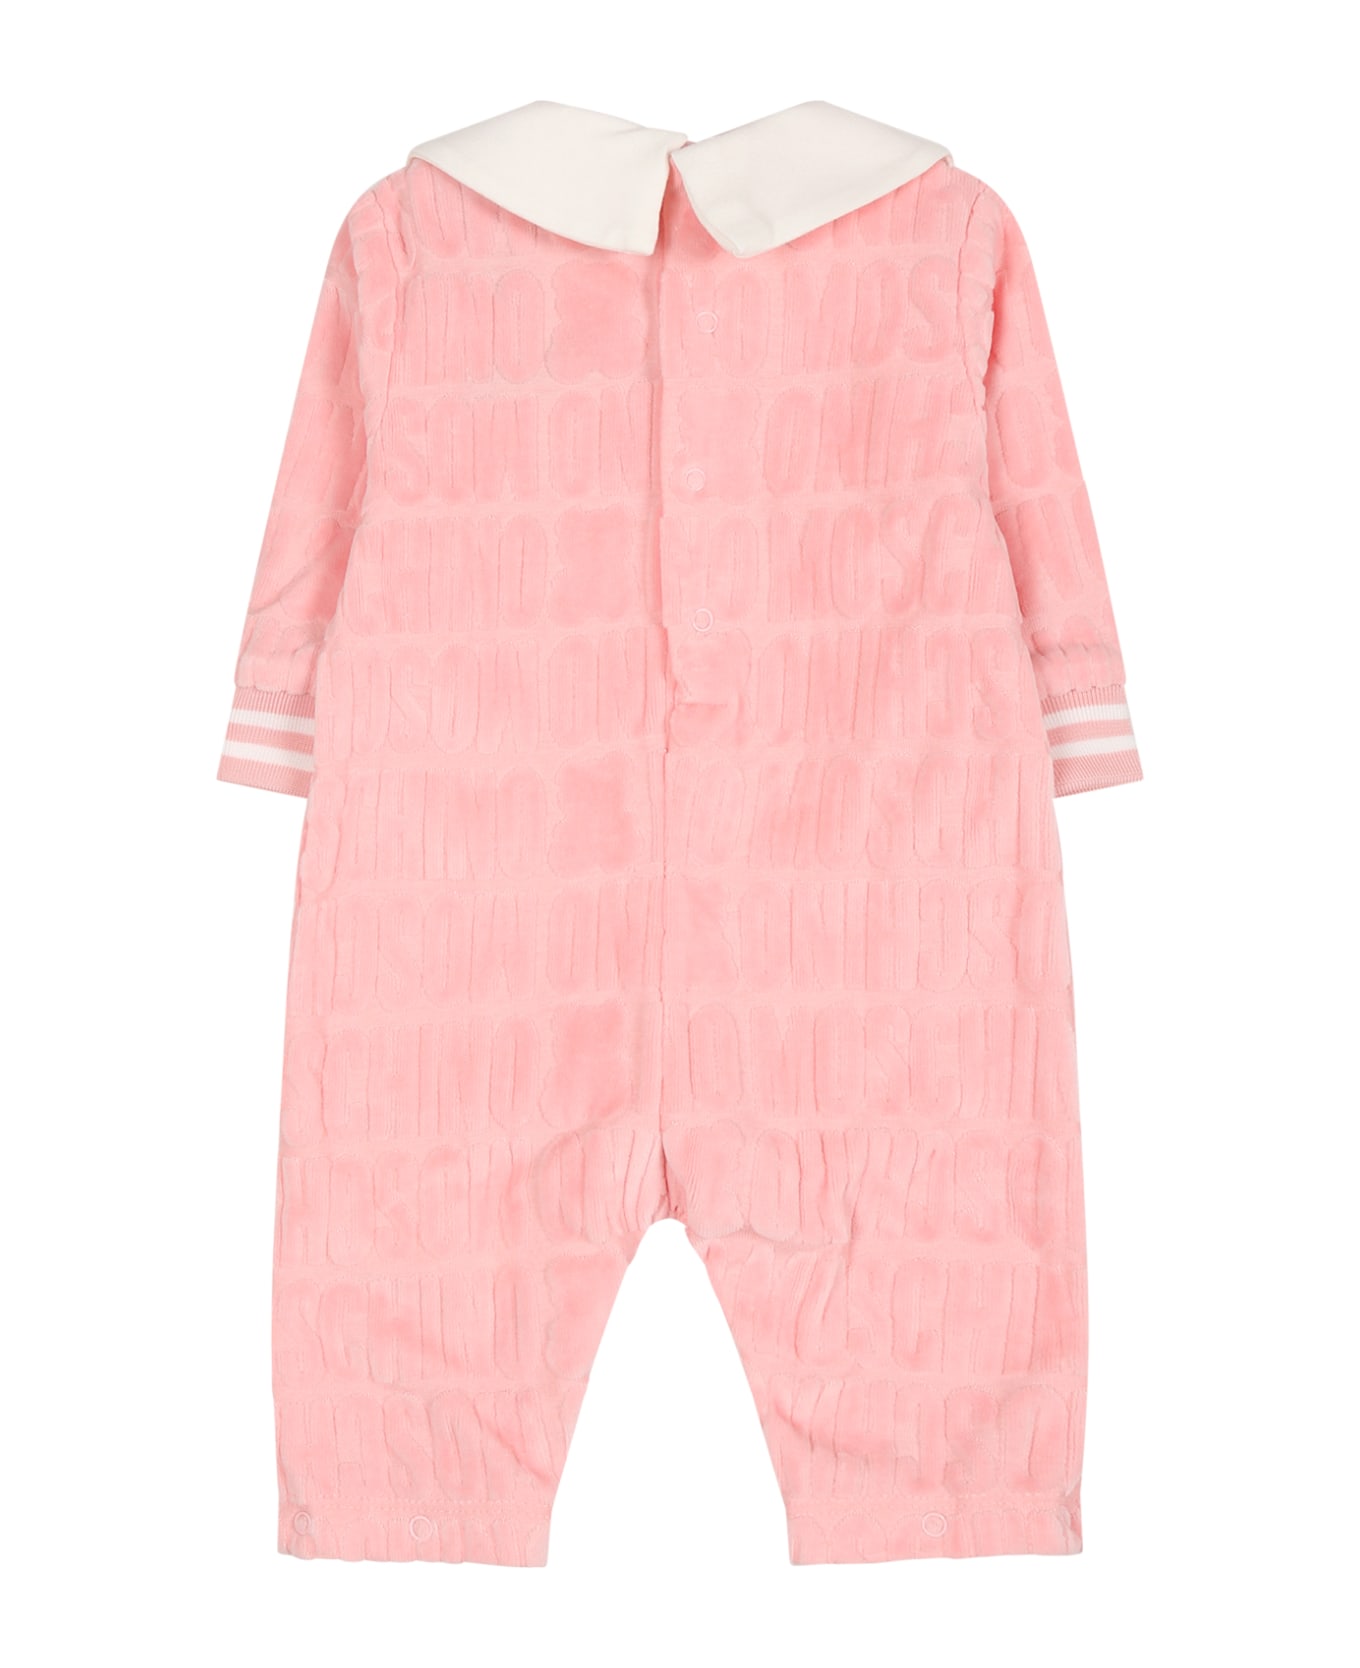 Moschino Pink Set For Baby Girl With Logo - Pink ボディスーツ＆セットアップ